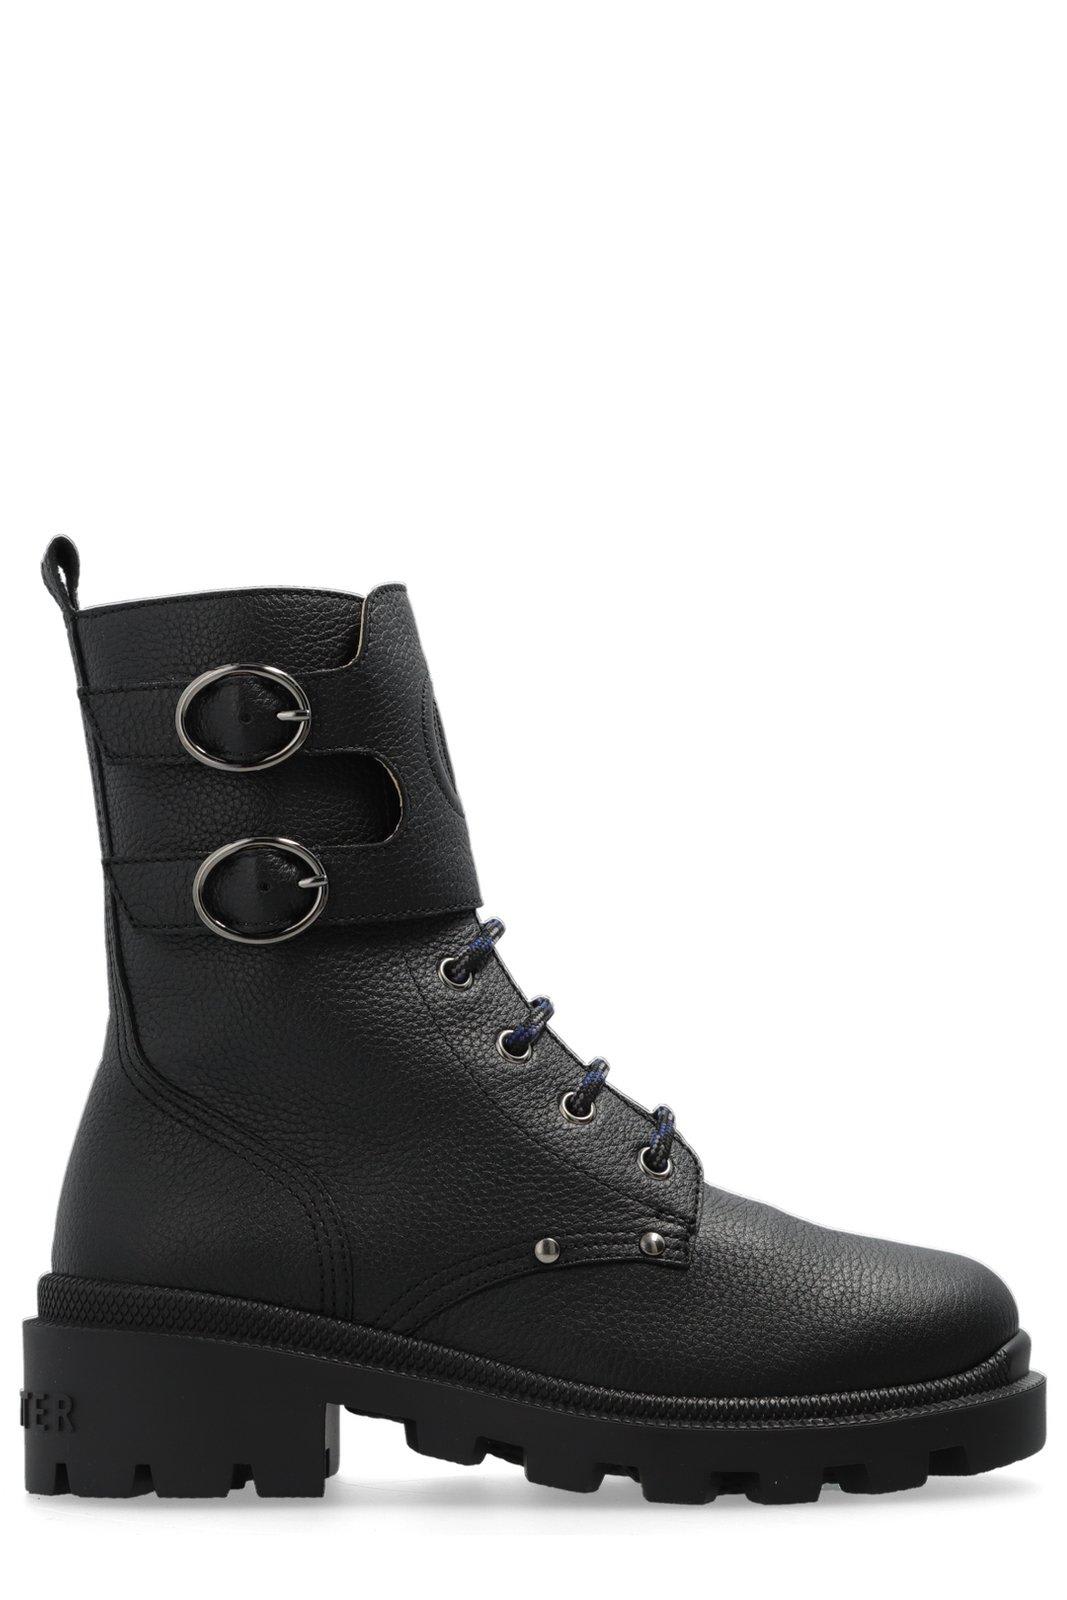 GUCCI DOUBLE G LACE-UP BOOTS